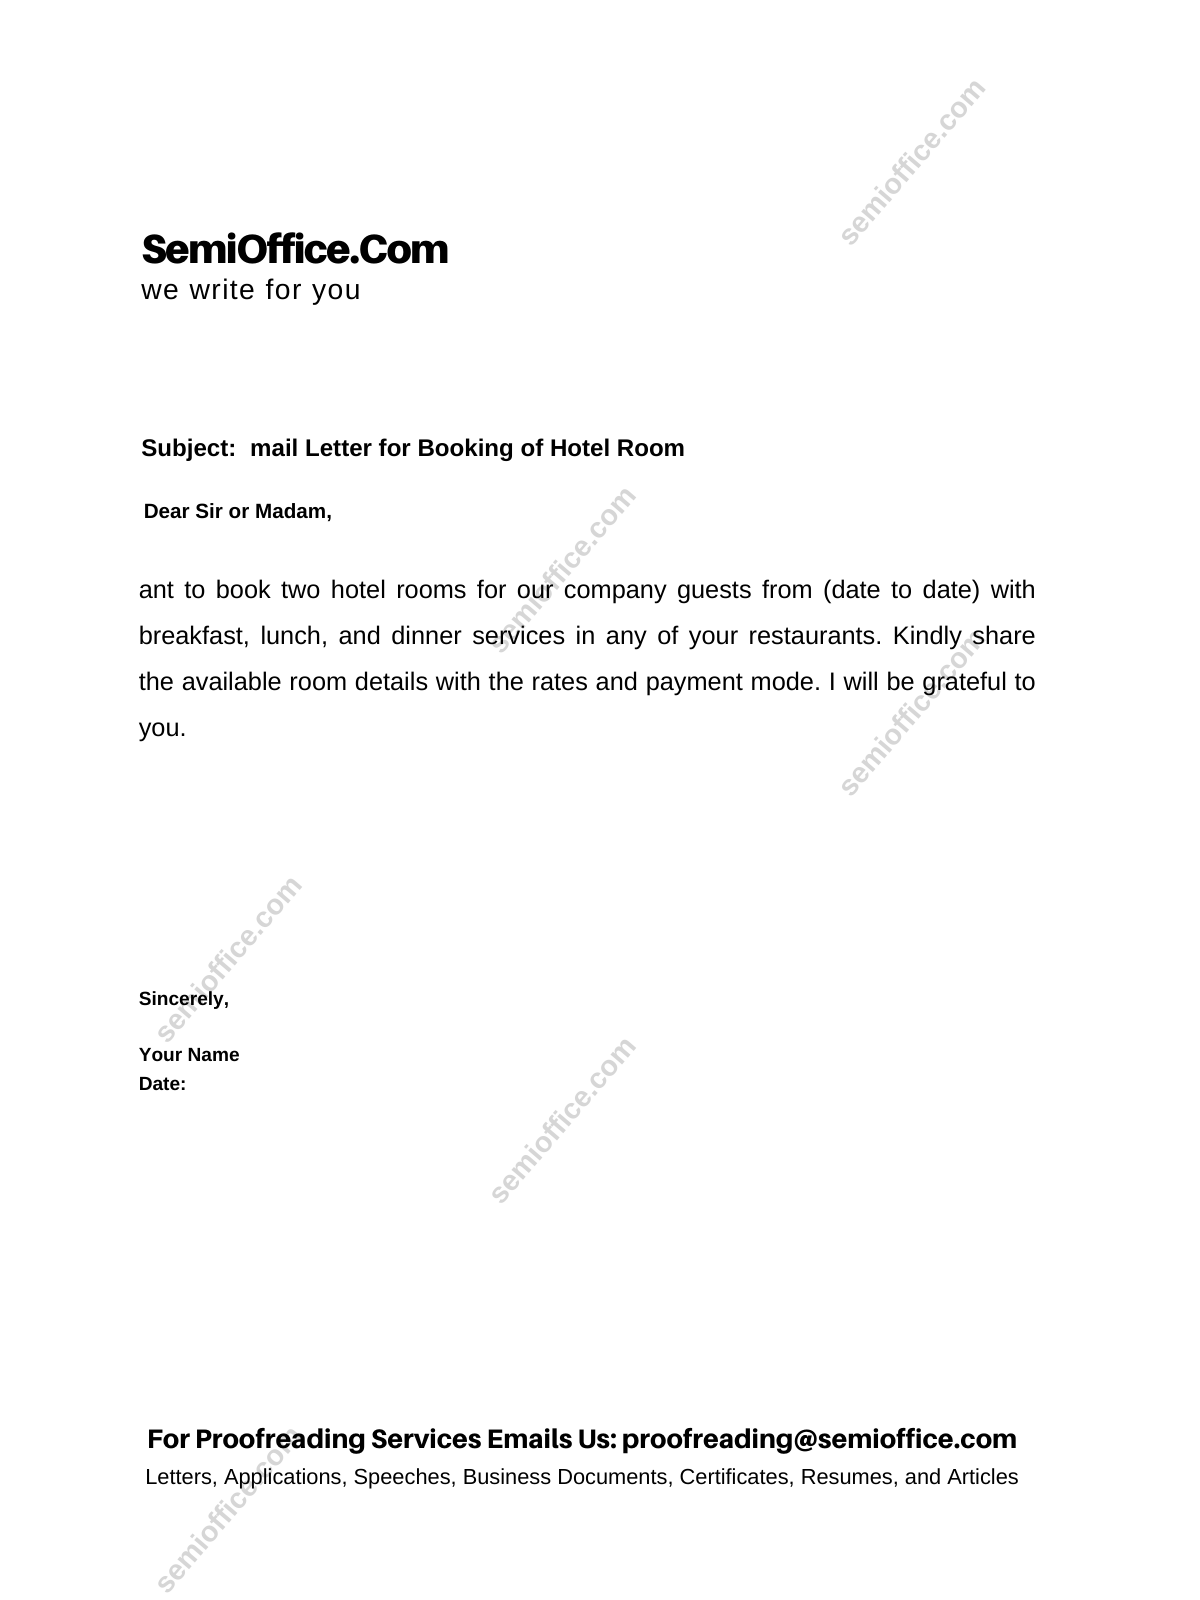 application letter for booking hotel